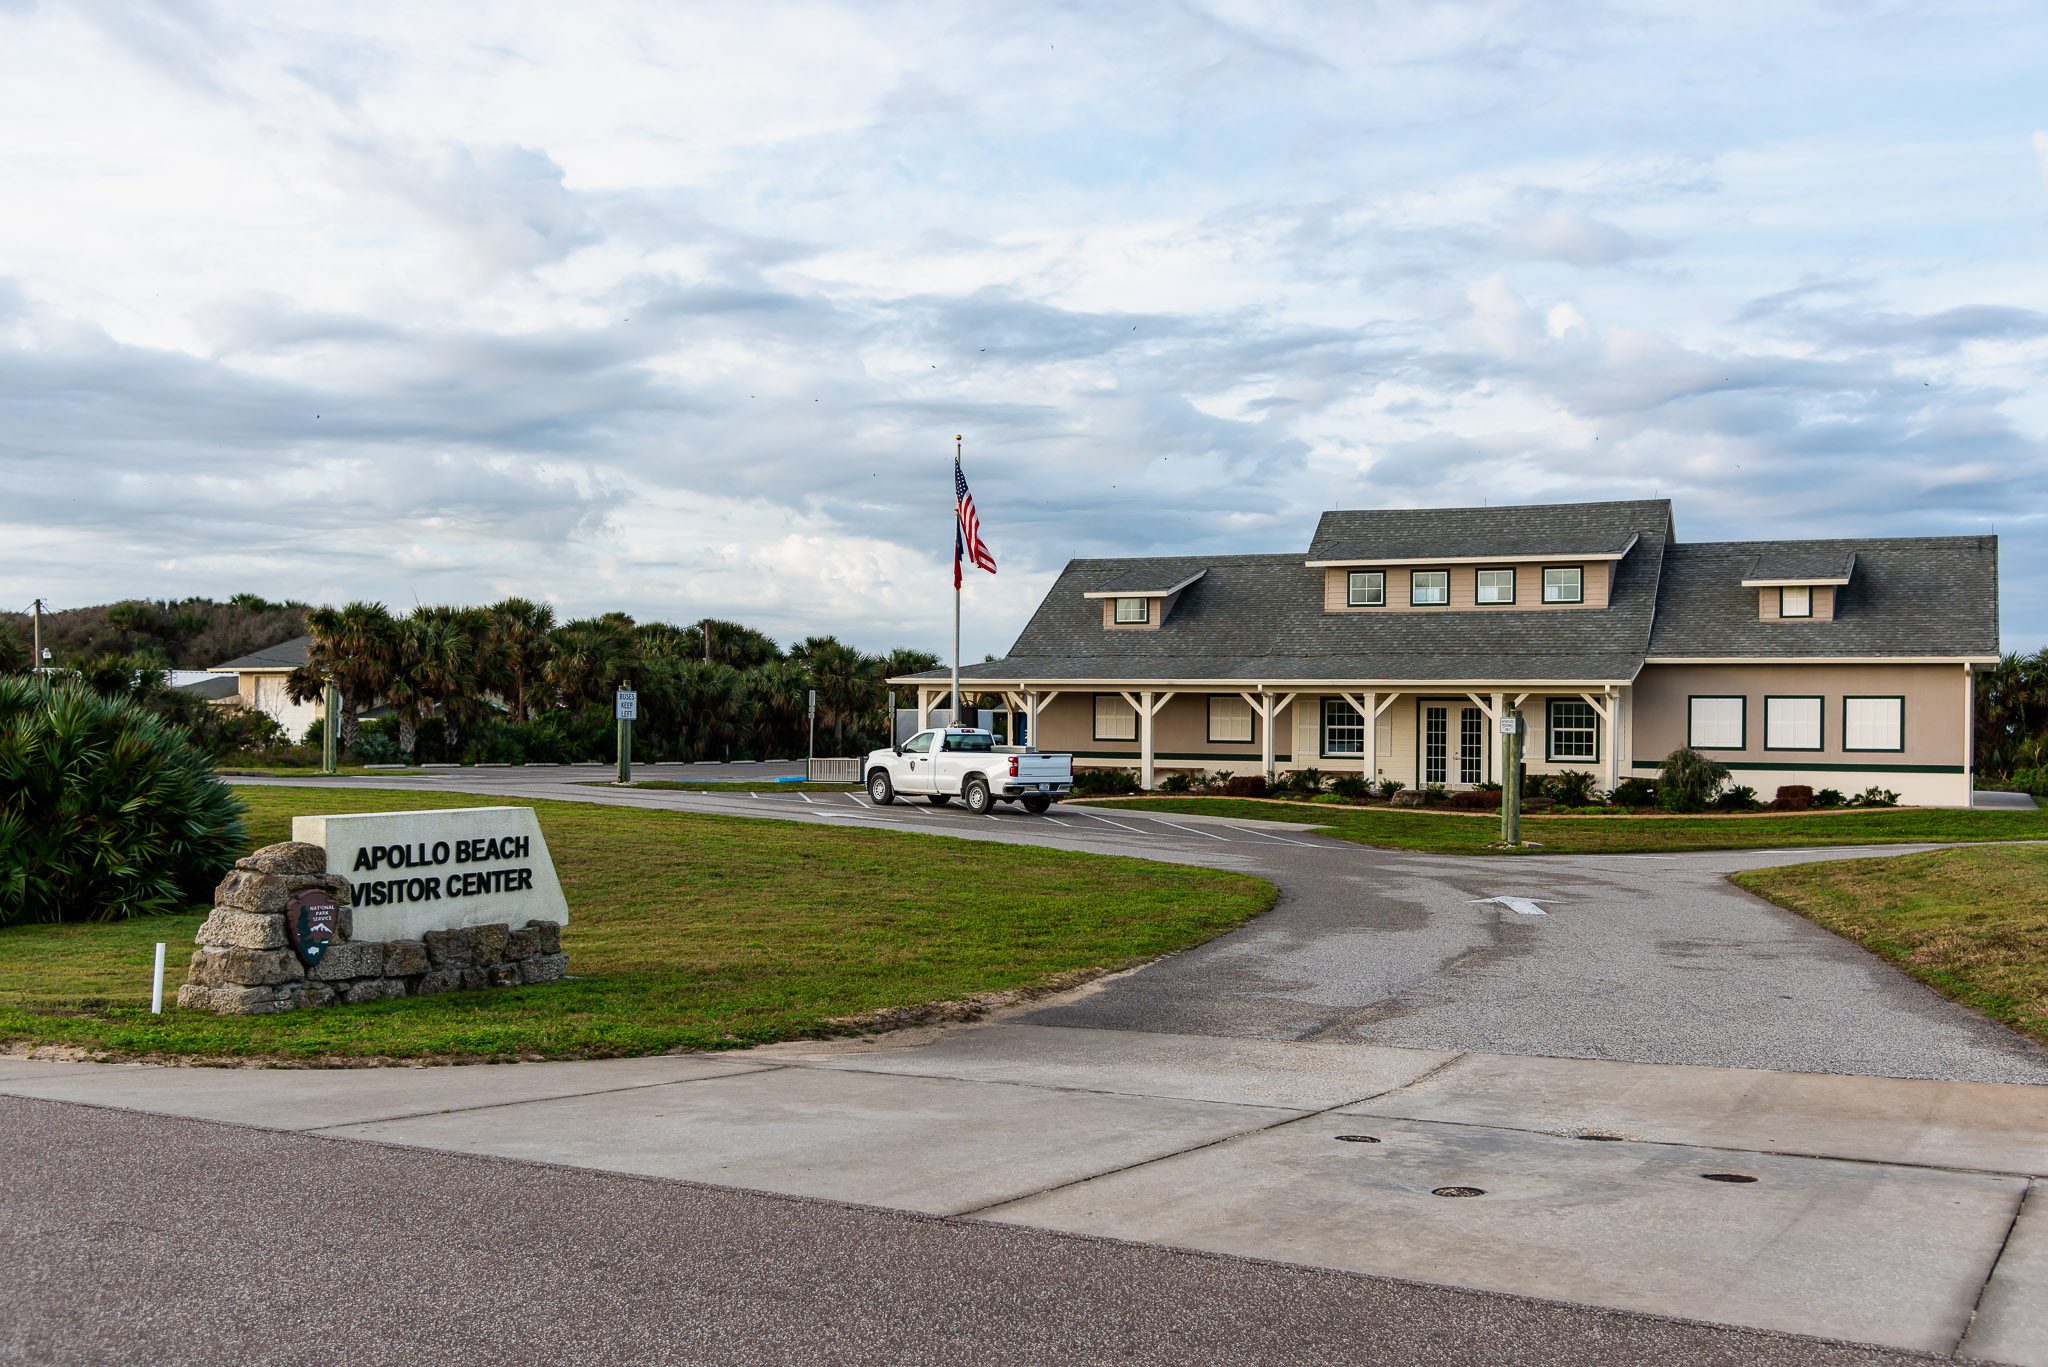 View of Apollo Beach Visitor Center from the road, A1A coming from New Smyrna Beach